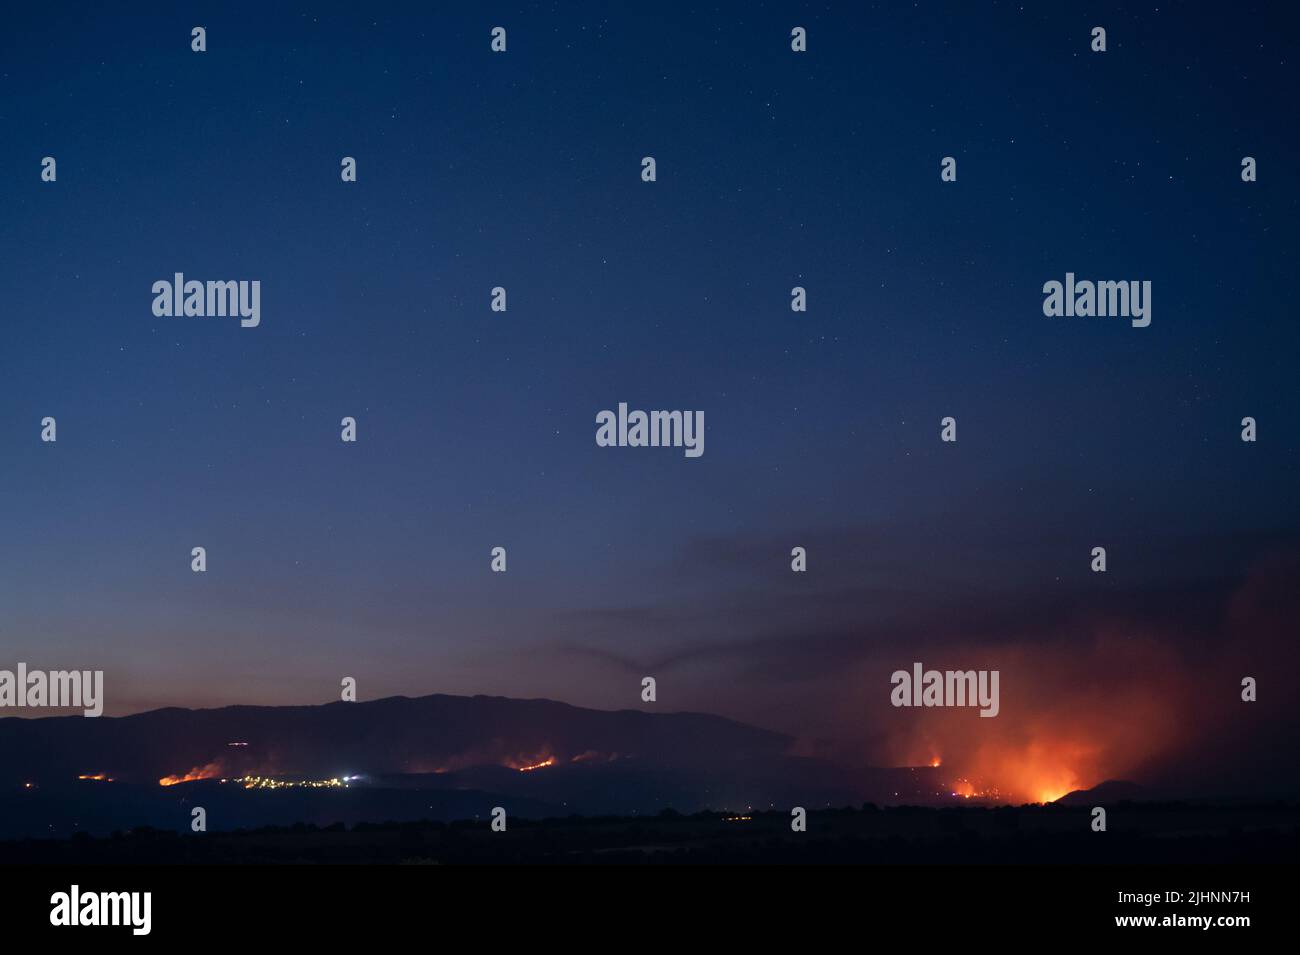 Guadalajara, Spain. 19th July, 2022. Wildfires are seen near Valdepeñas de la Sierra, where several fires have forced to evacuate nearly 70 residents from the area. Wildfires have broken out across Spain amid a severe heatwave. Credit: Marcos del Mazo/Alamy Live News Stock Photo